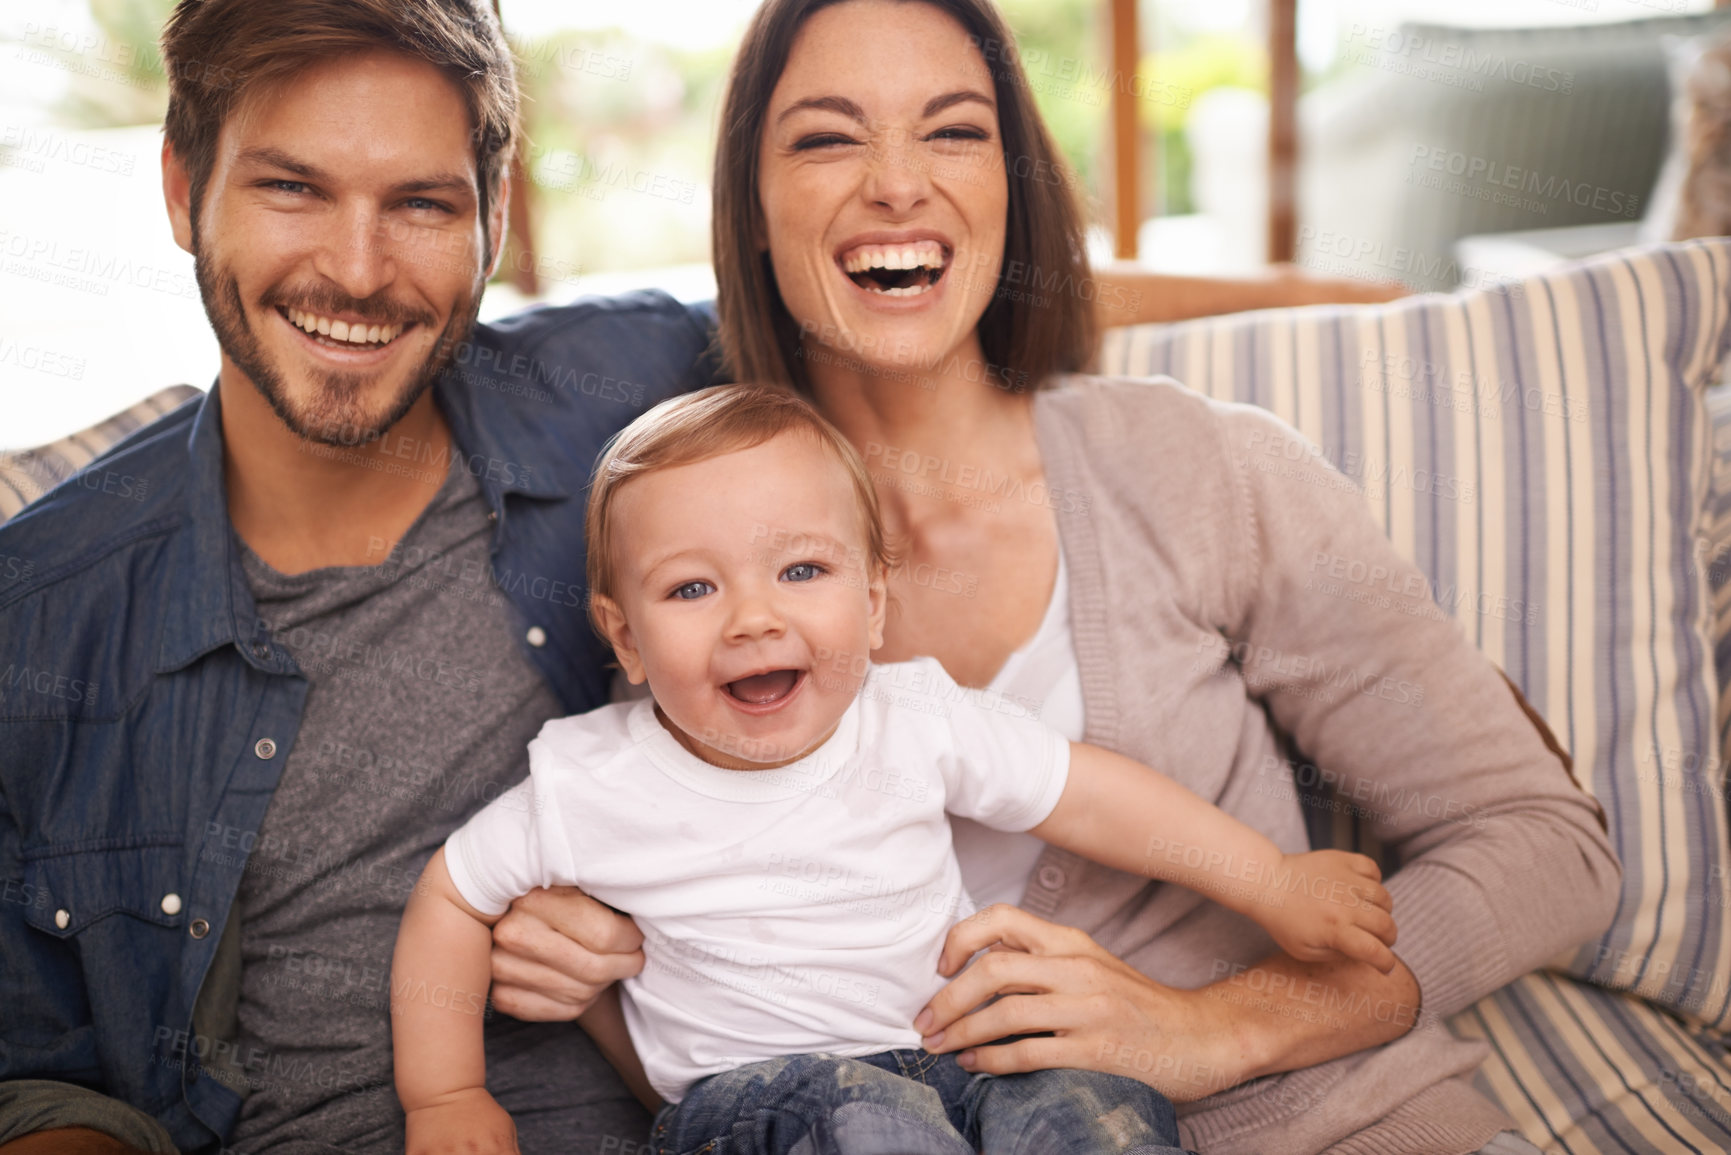 Buy stock photo Laughing, happy family or portrait of baby on sofa in home for support, security or bonding in living room. Parents, boy or toddler with mom or father for love or care for child development or growth